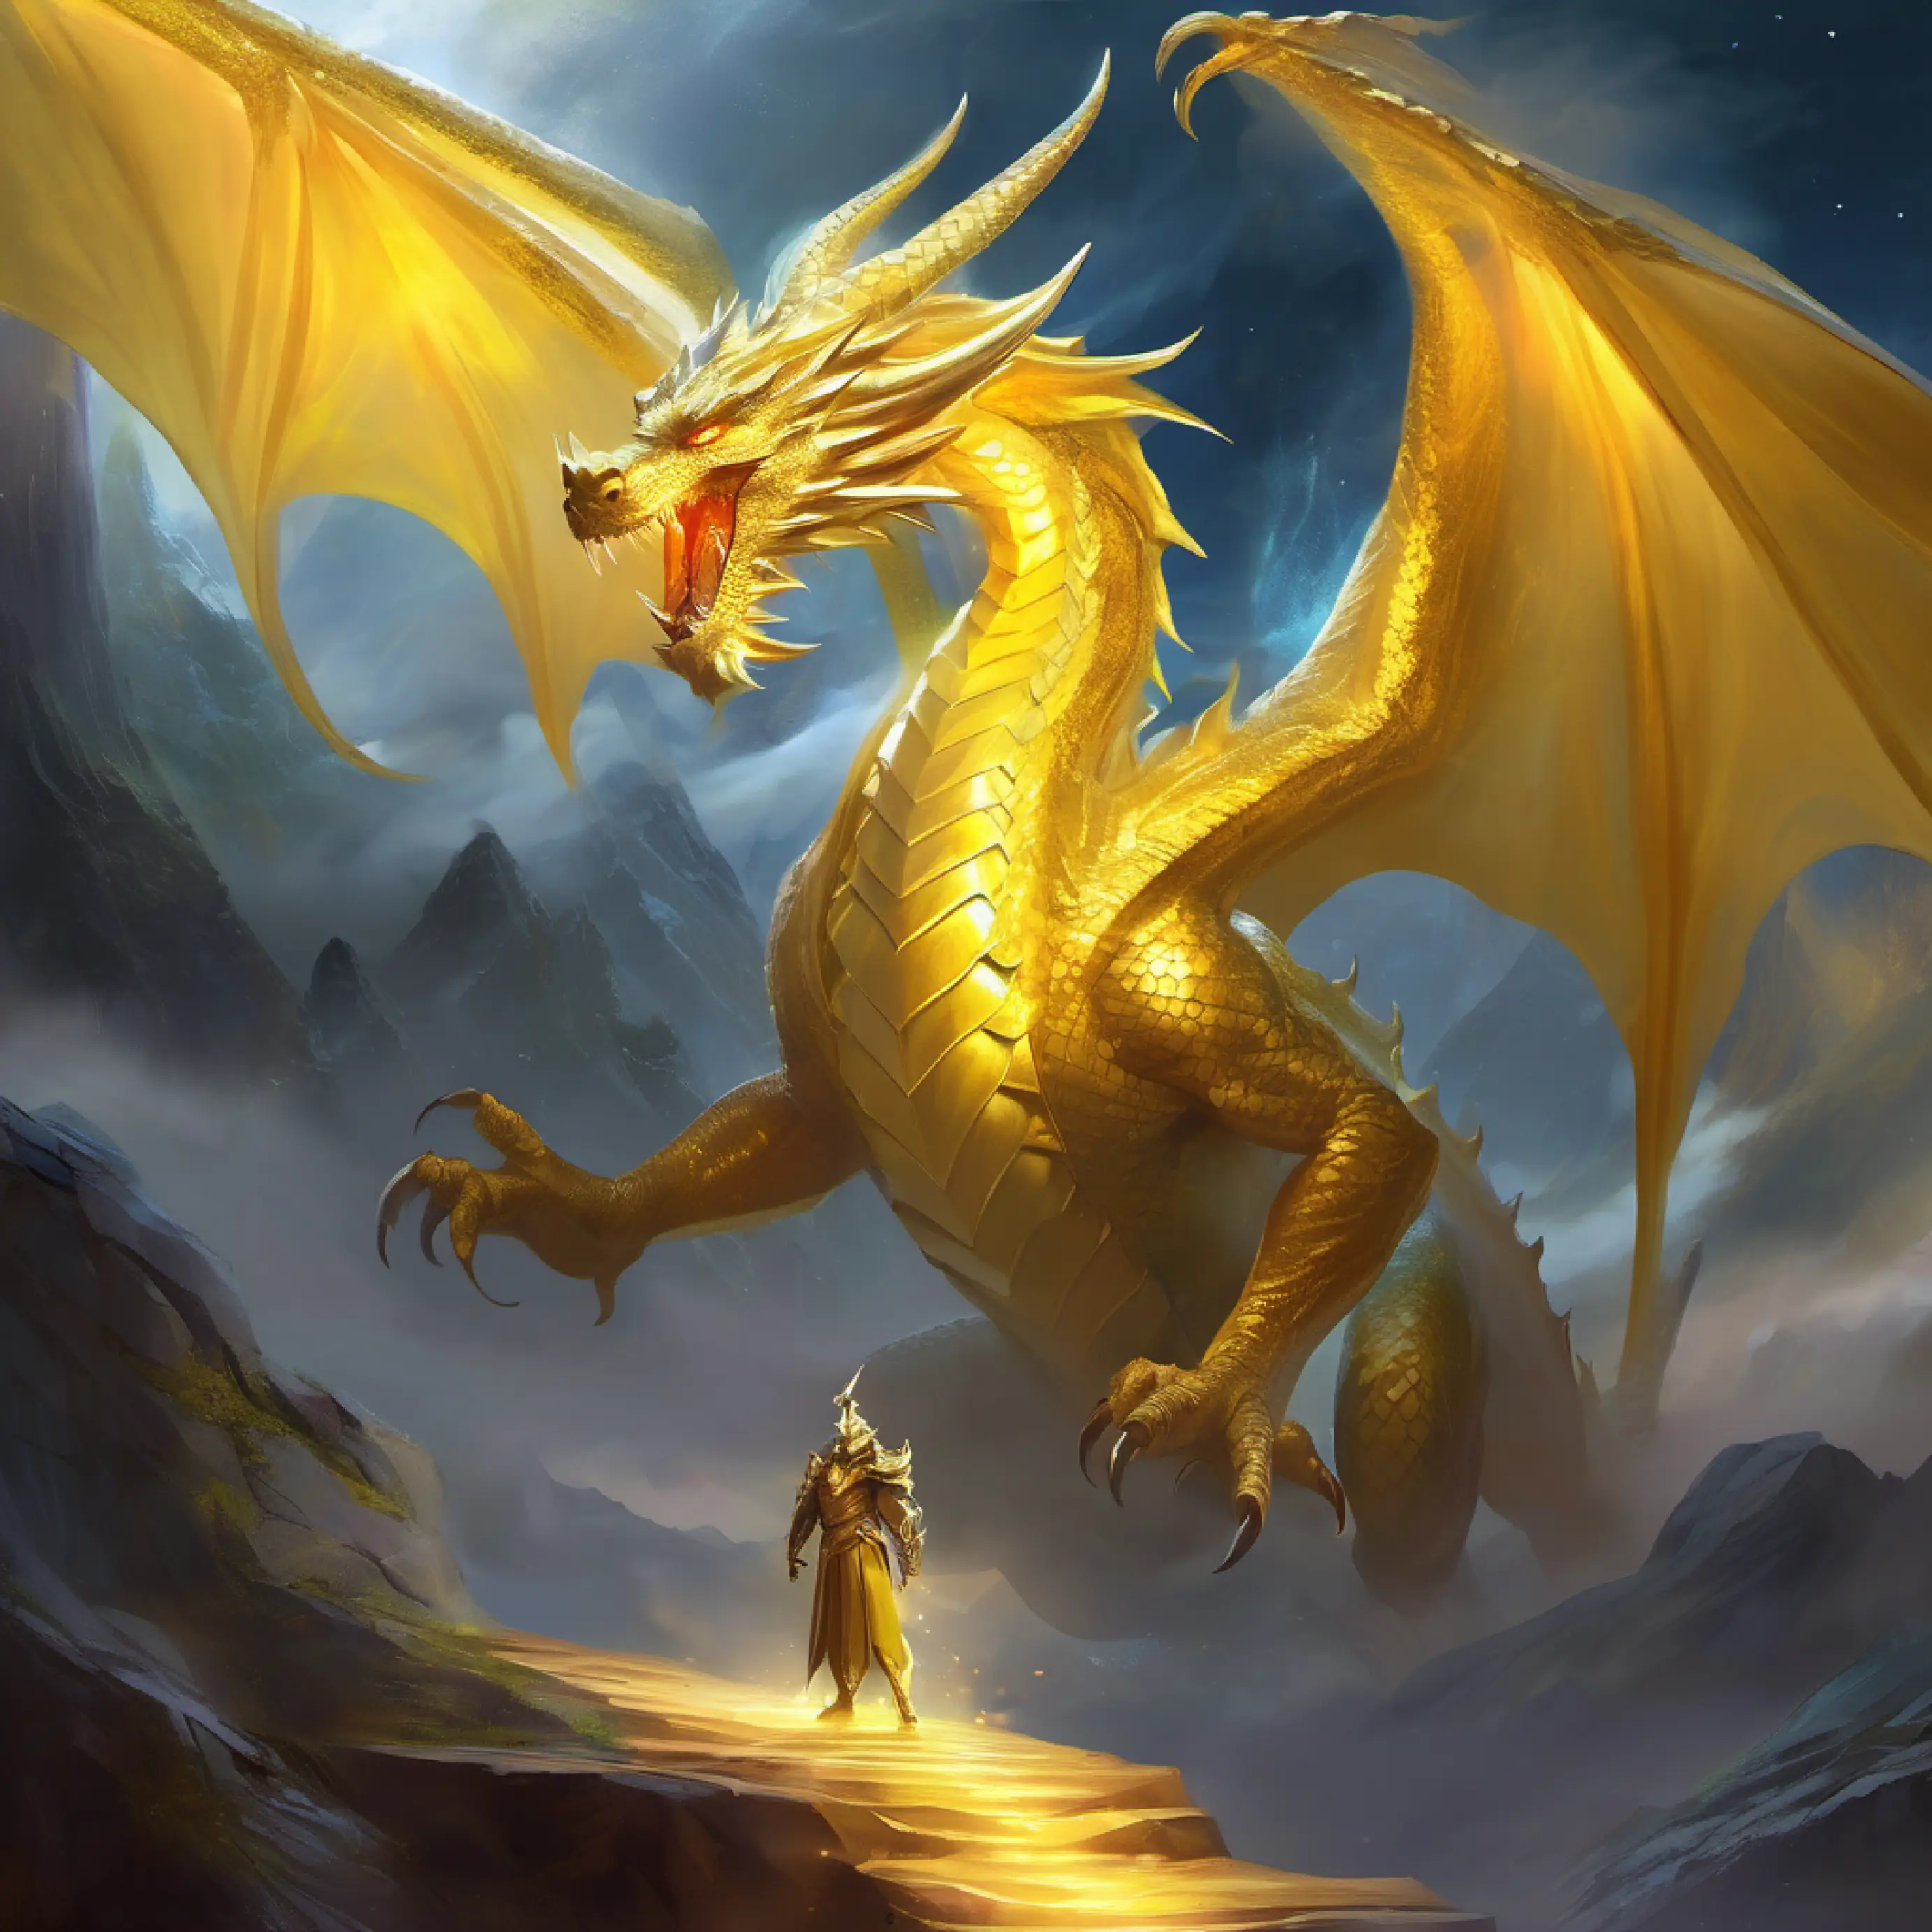 Introduction of the antagonist, Gigantic dragon with shimmering scales and piercing yellow eyes, and the setting